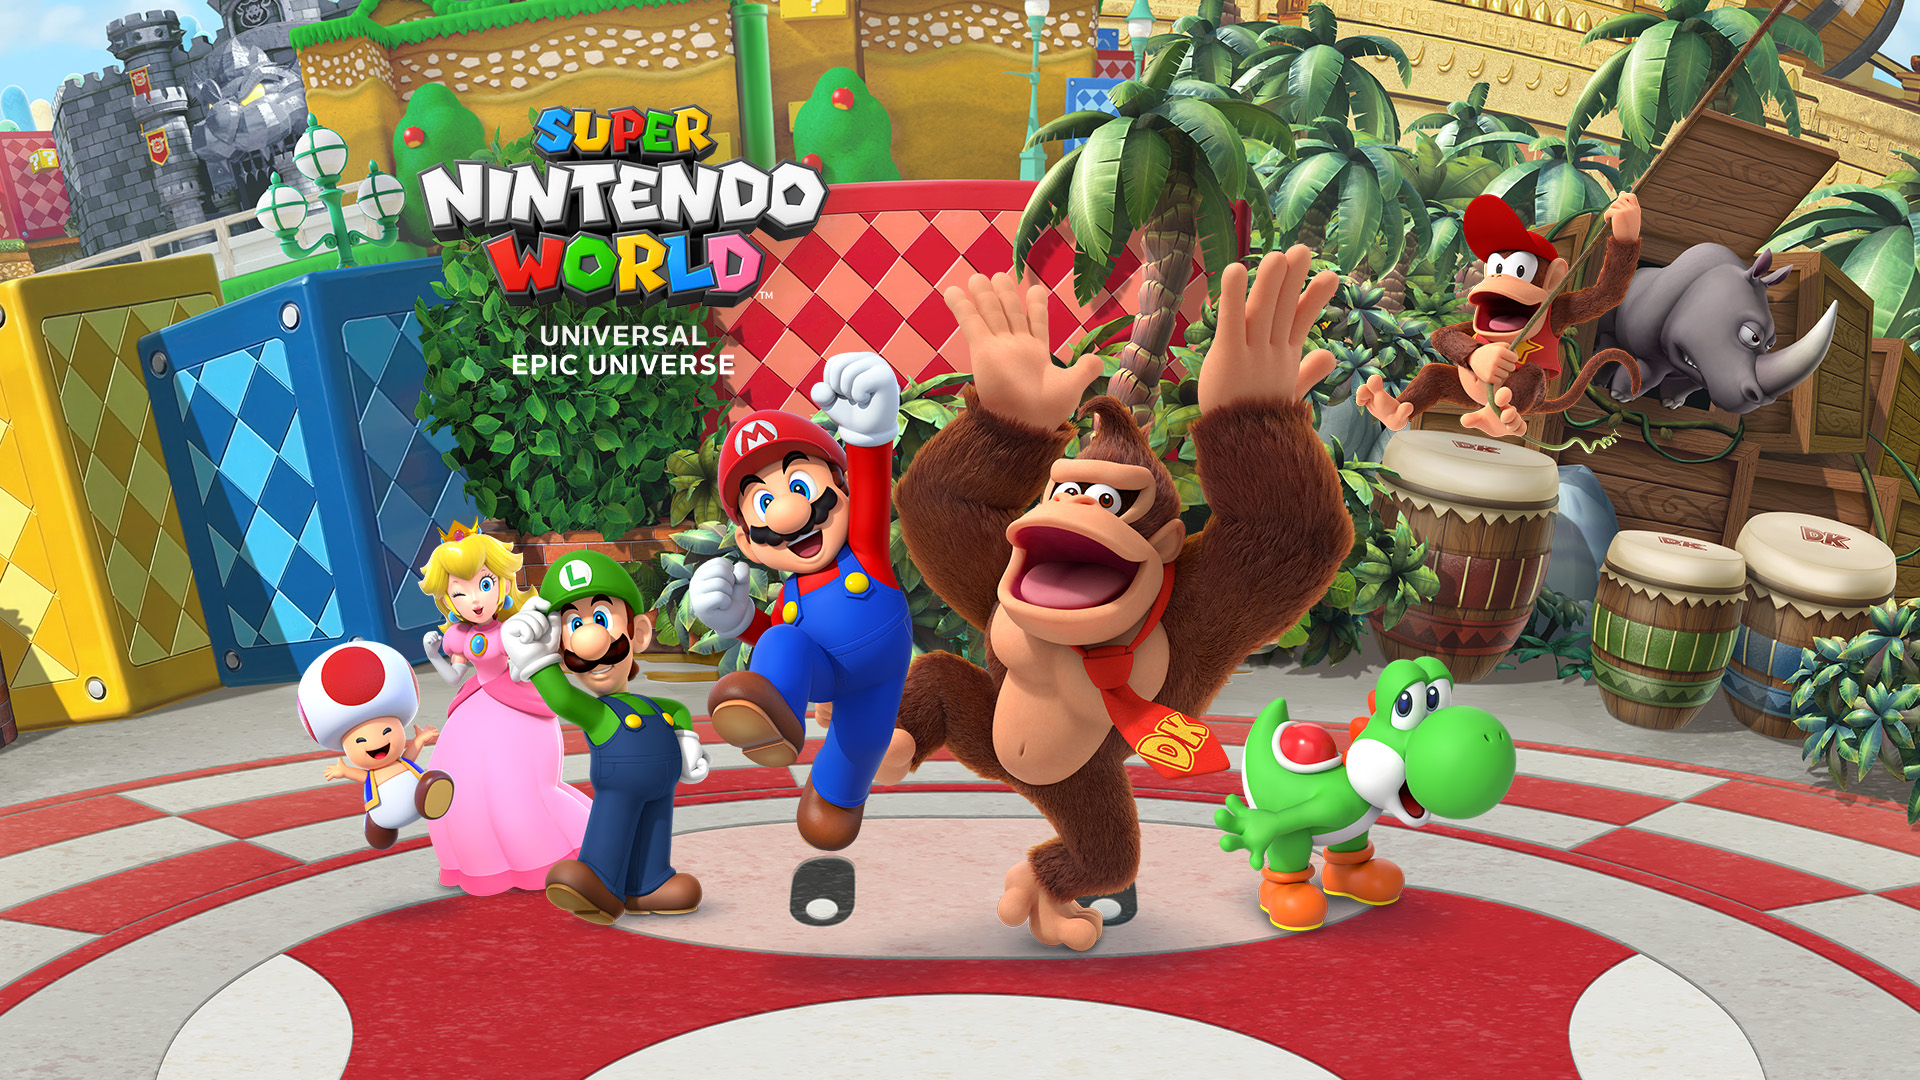 Discover a New Way to Play…Universal Orlando Resort Unveils Exciting New Details About Its Most Colorful and Interactive Experience Yet – Super Nintendo World – Coming to Universal Epic Universe in 2025